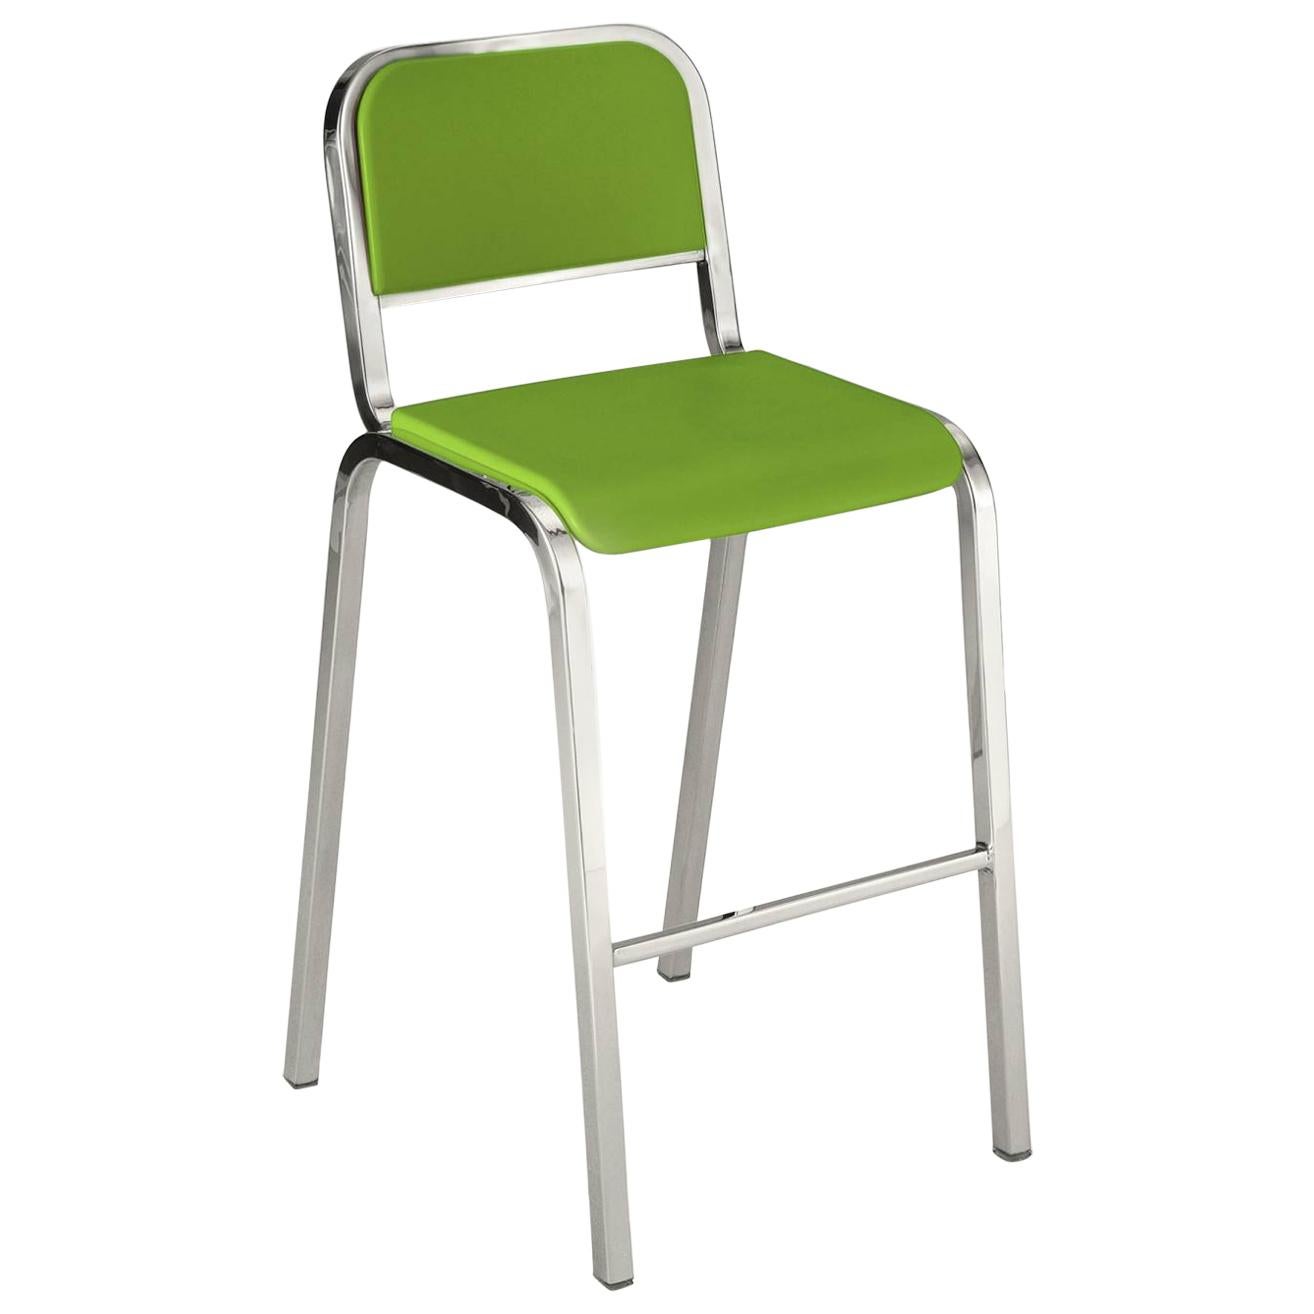 Emeco Nine-0 Barstool in Polished Aluminum and Green by Ettore Sottsass